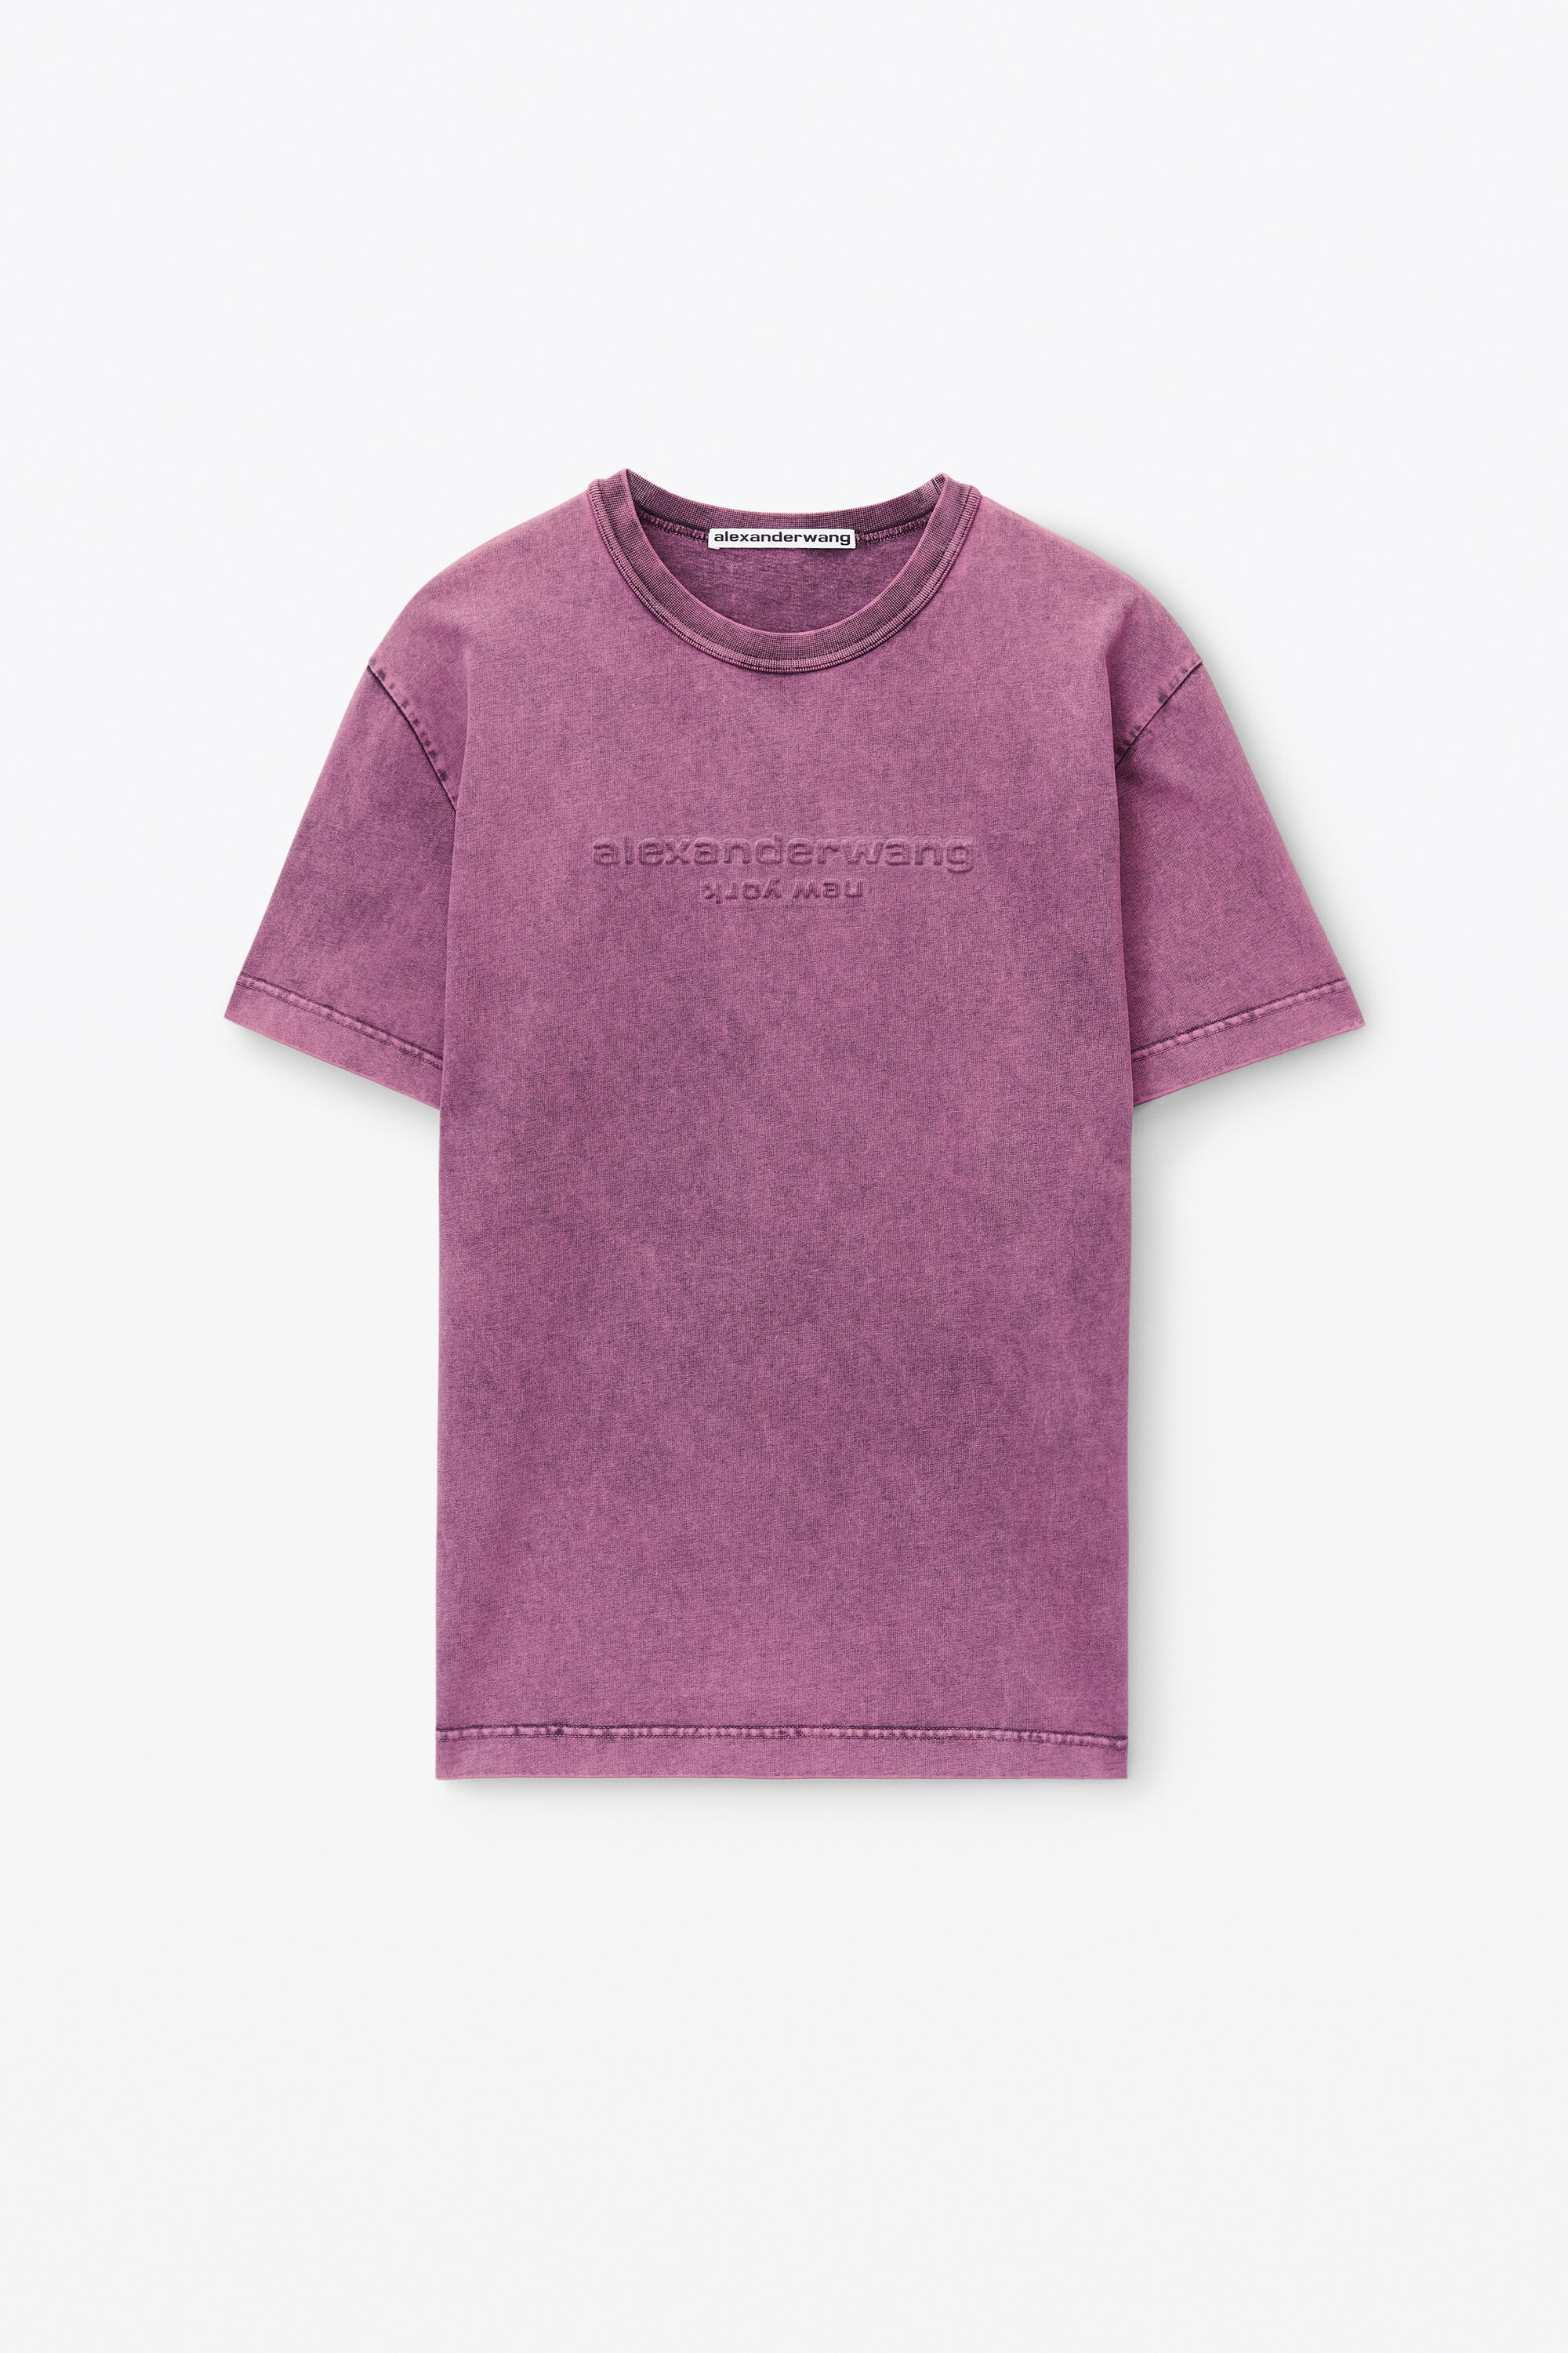 embossed logo tee in compact jersey in ACID CANDY PINK 